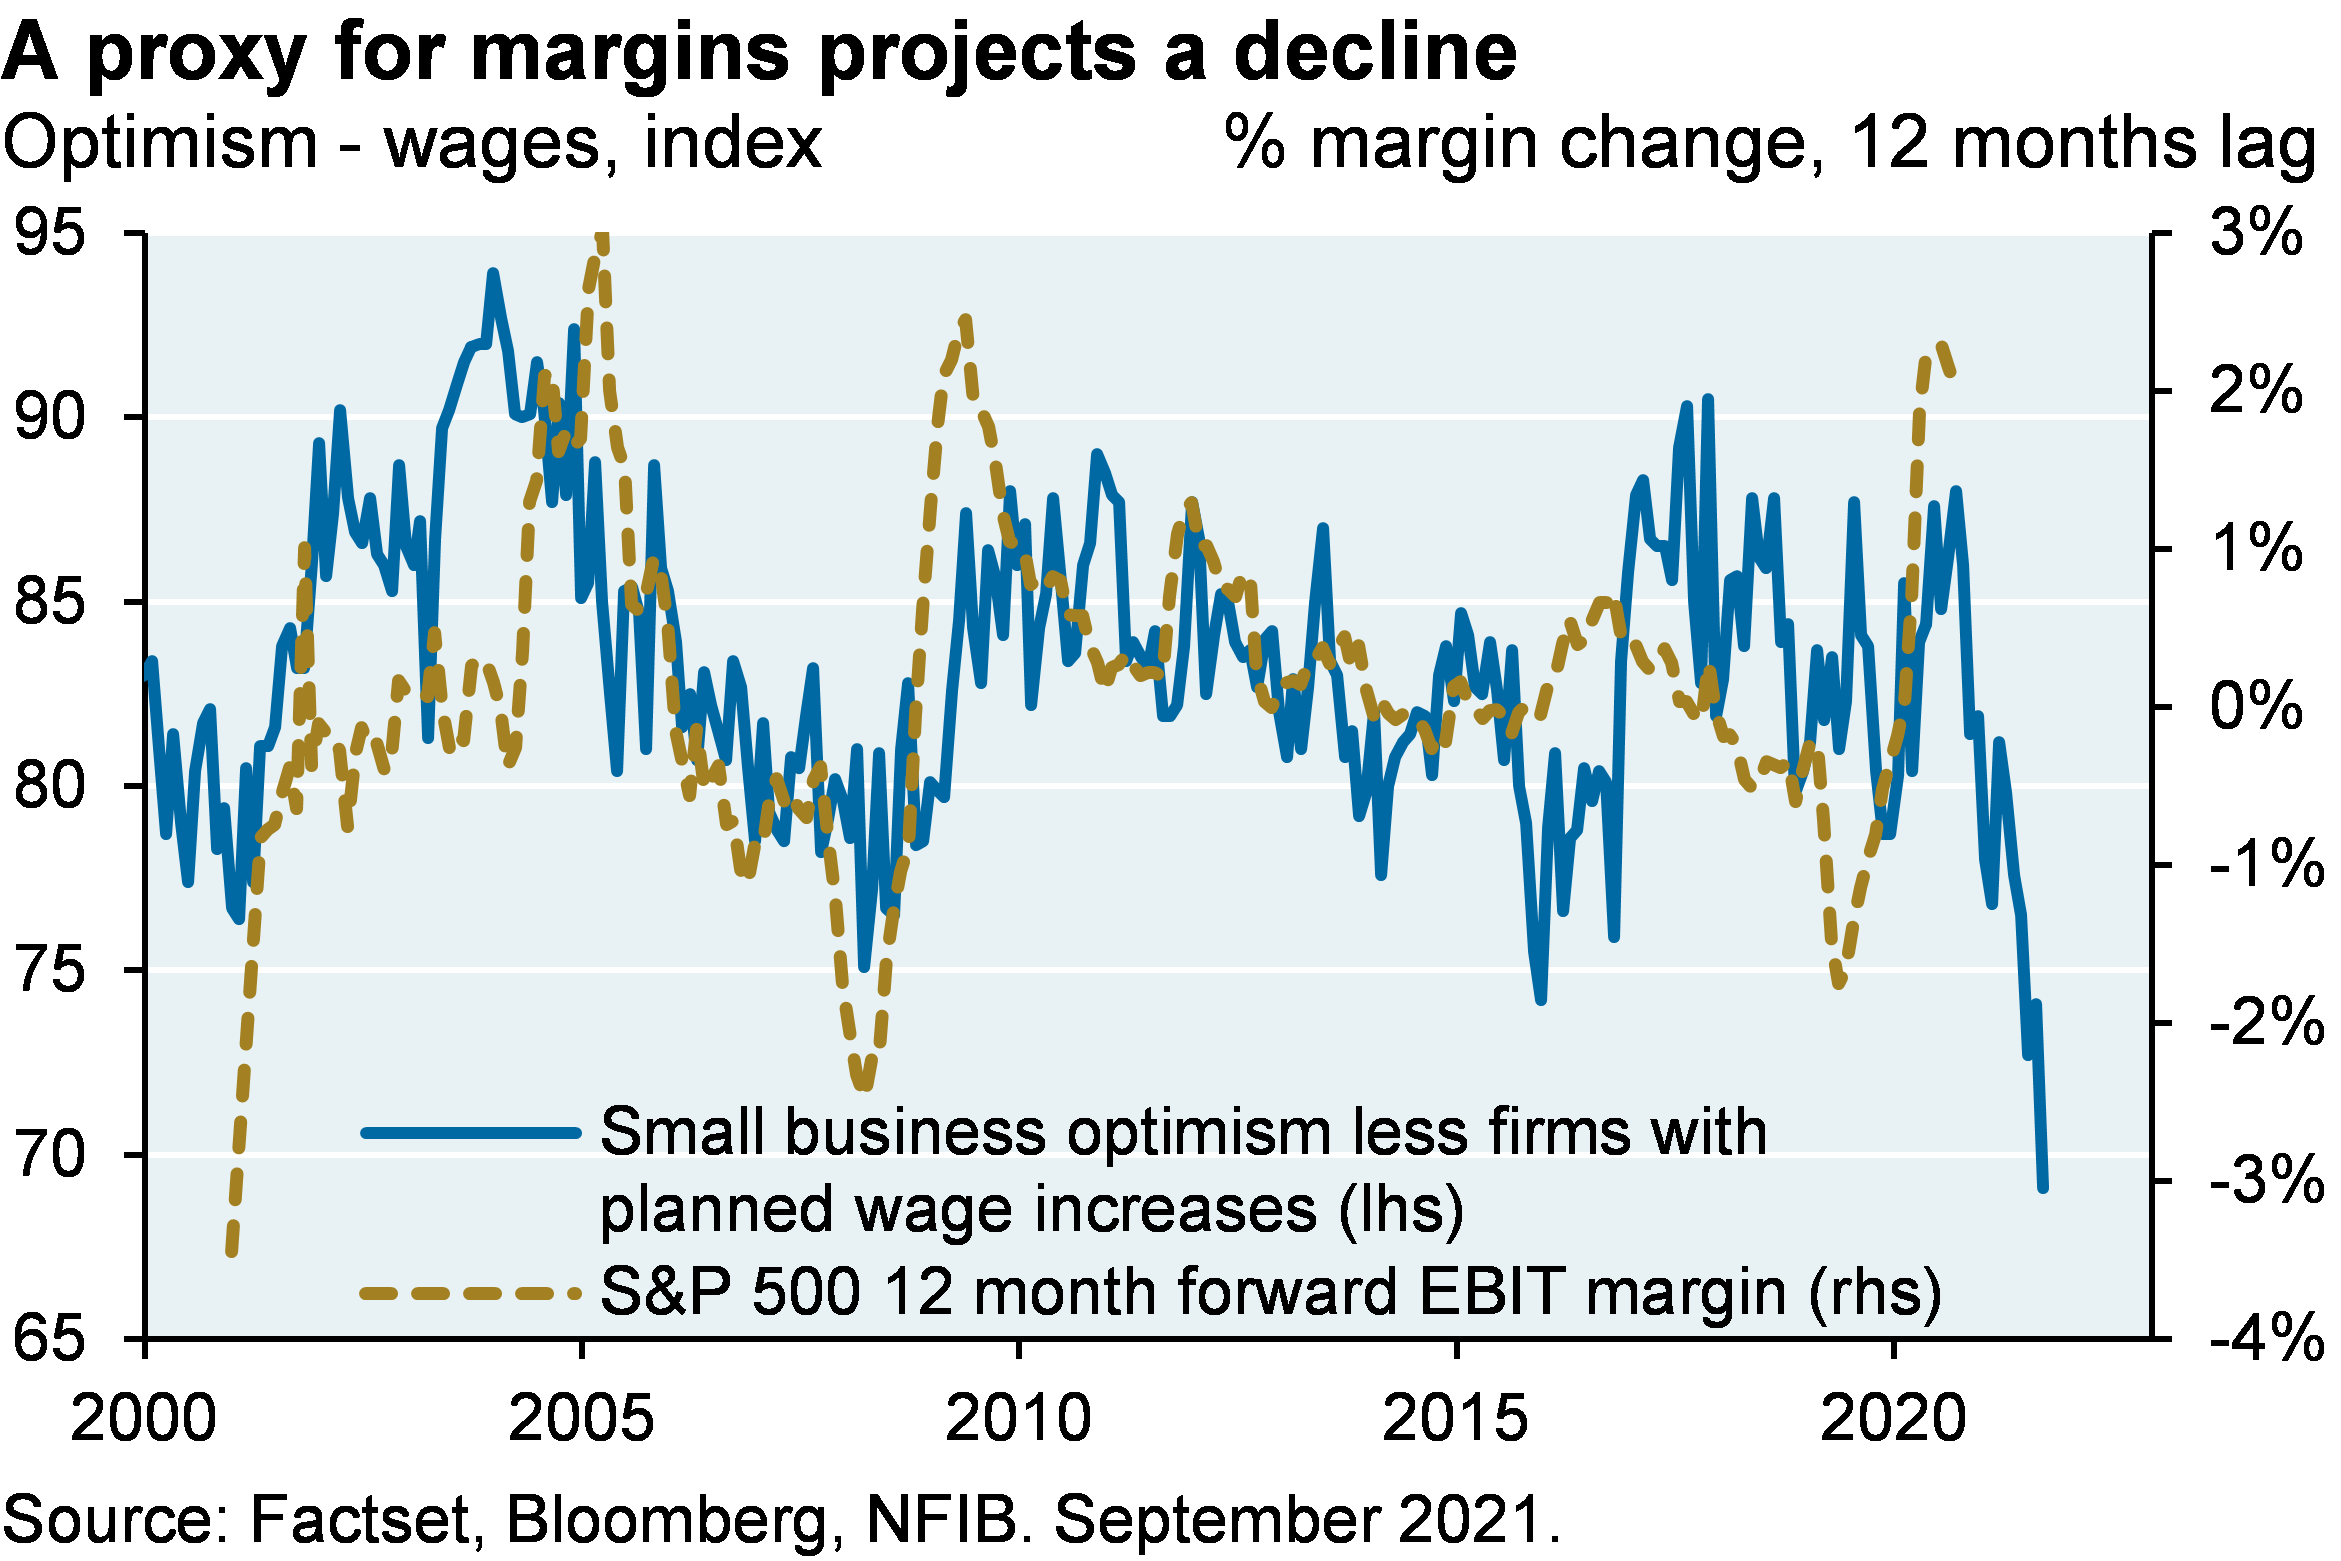 Line chart shows the small business optimism index less firms planning to raise wages on the left axis and the % forward EBIT margin change over the last 12 months on the right axis. Optimism – planned wage increases can be used as a proxy for margins expectations and implies a decline over the next 12 months.